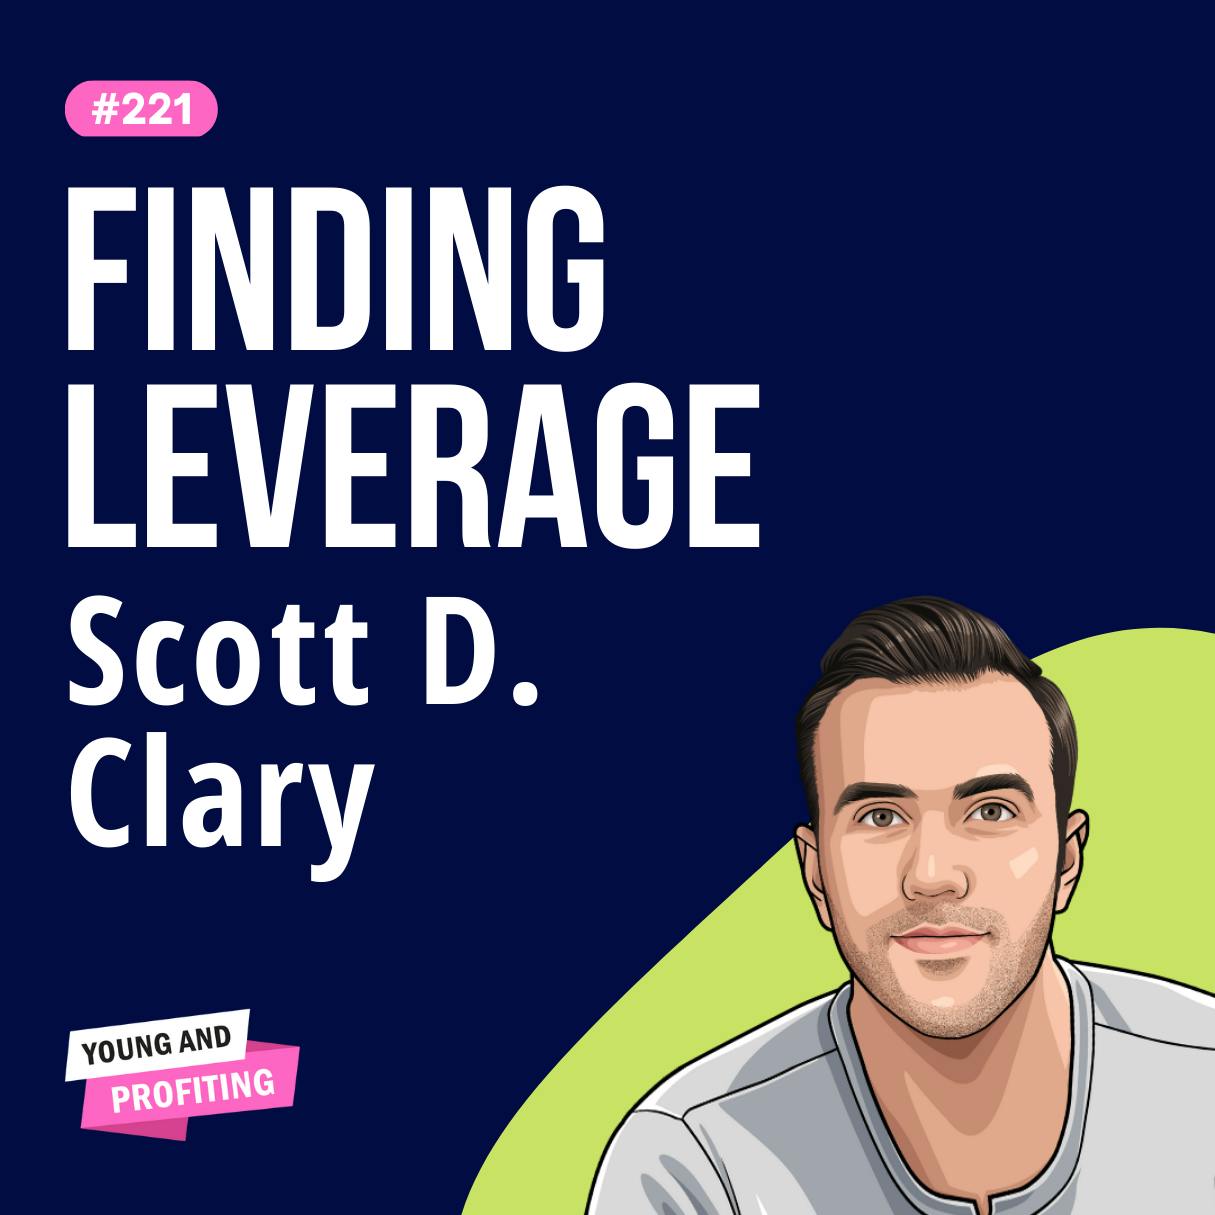 Scott D. Clary: Overcoming Imposter Syndrome, Getting Started in Entrepreneurship, and Finding Product Market Fit | E221 | Part 1  by Hala Taha | YAP Media Network